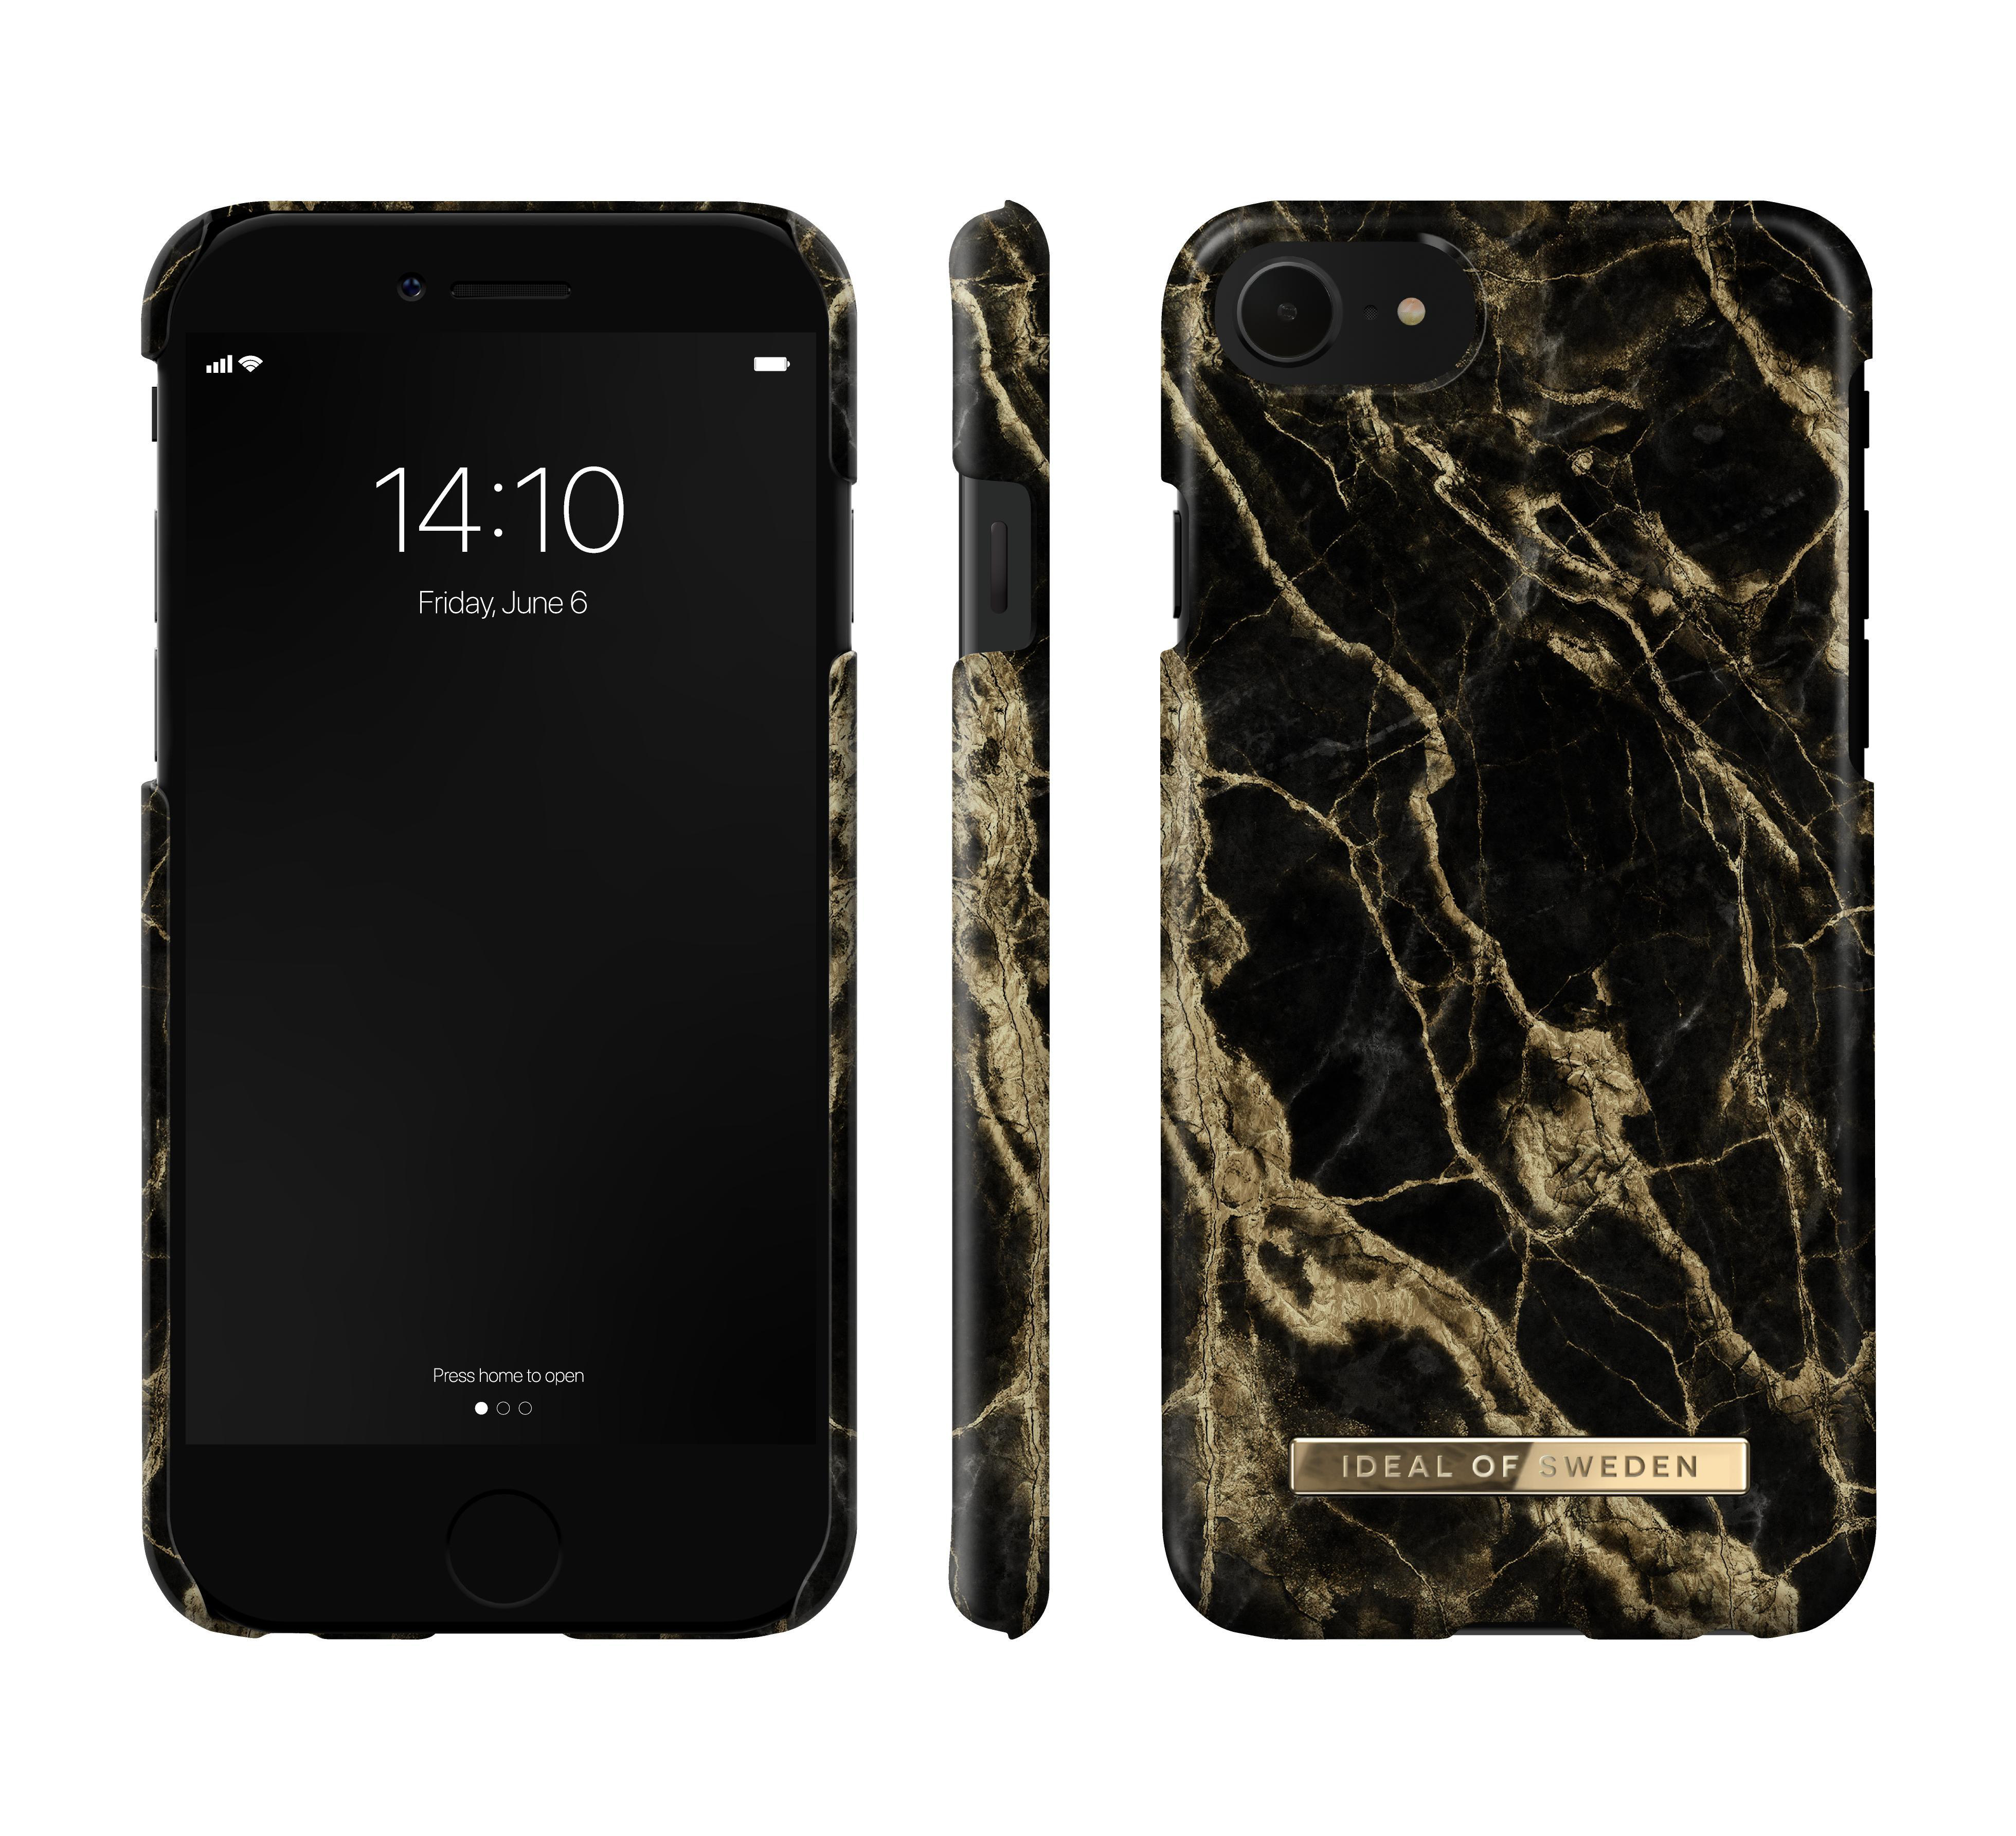 OF IDEAL Black 7, SE, iPhone 6, 8, iPhone Fashion, Apple, Backcover, SWEDEN iPhone iPhone